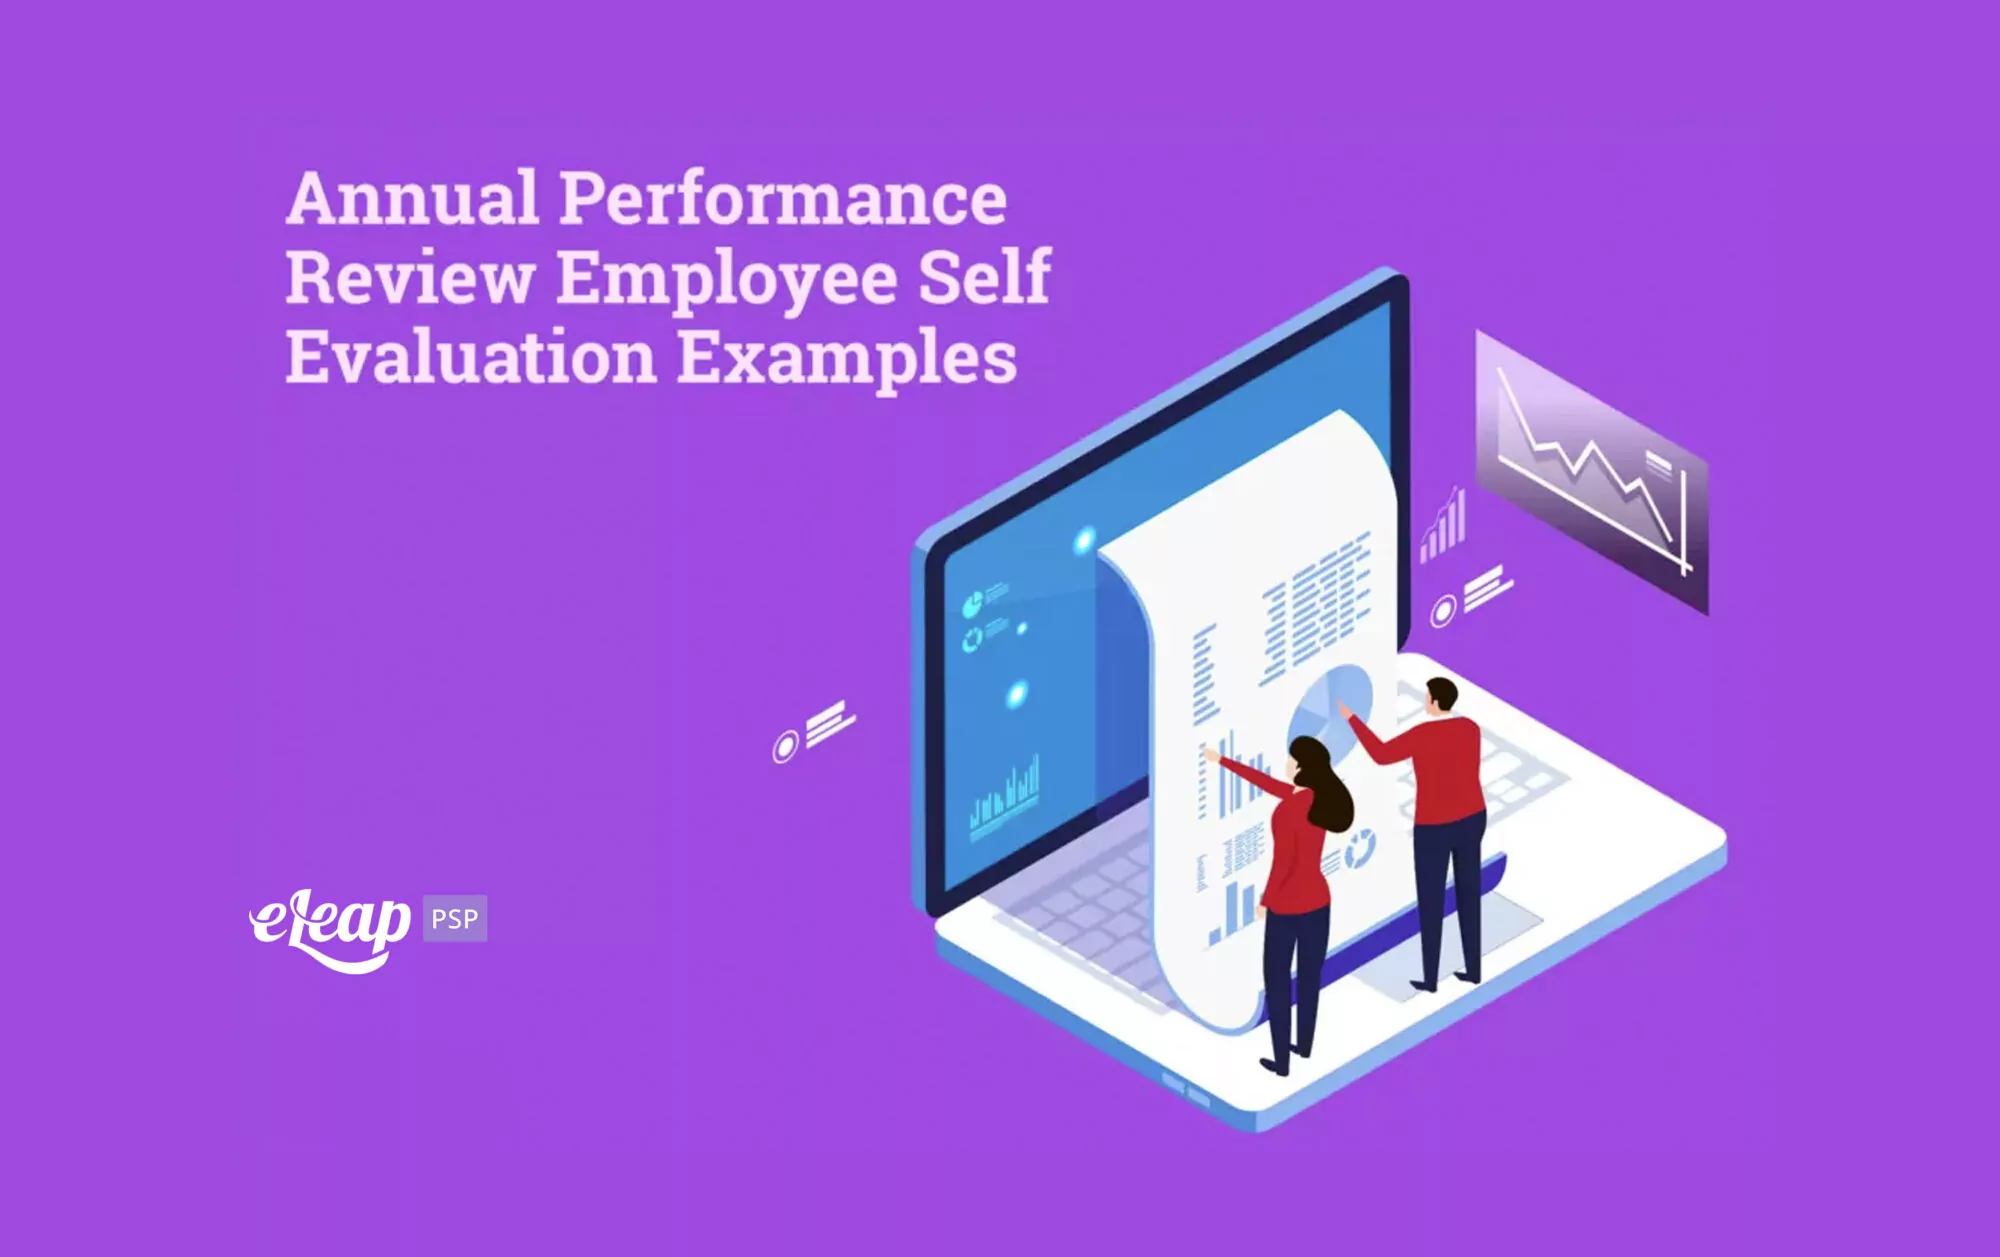 Annual Performance Review Employee Self Evaluation Examples